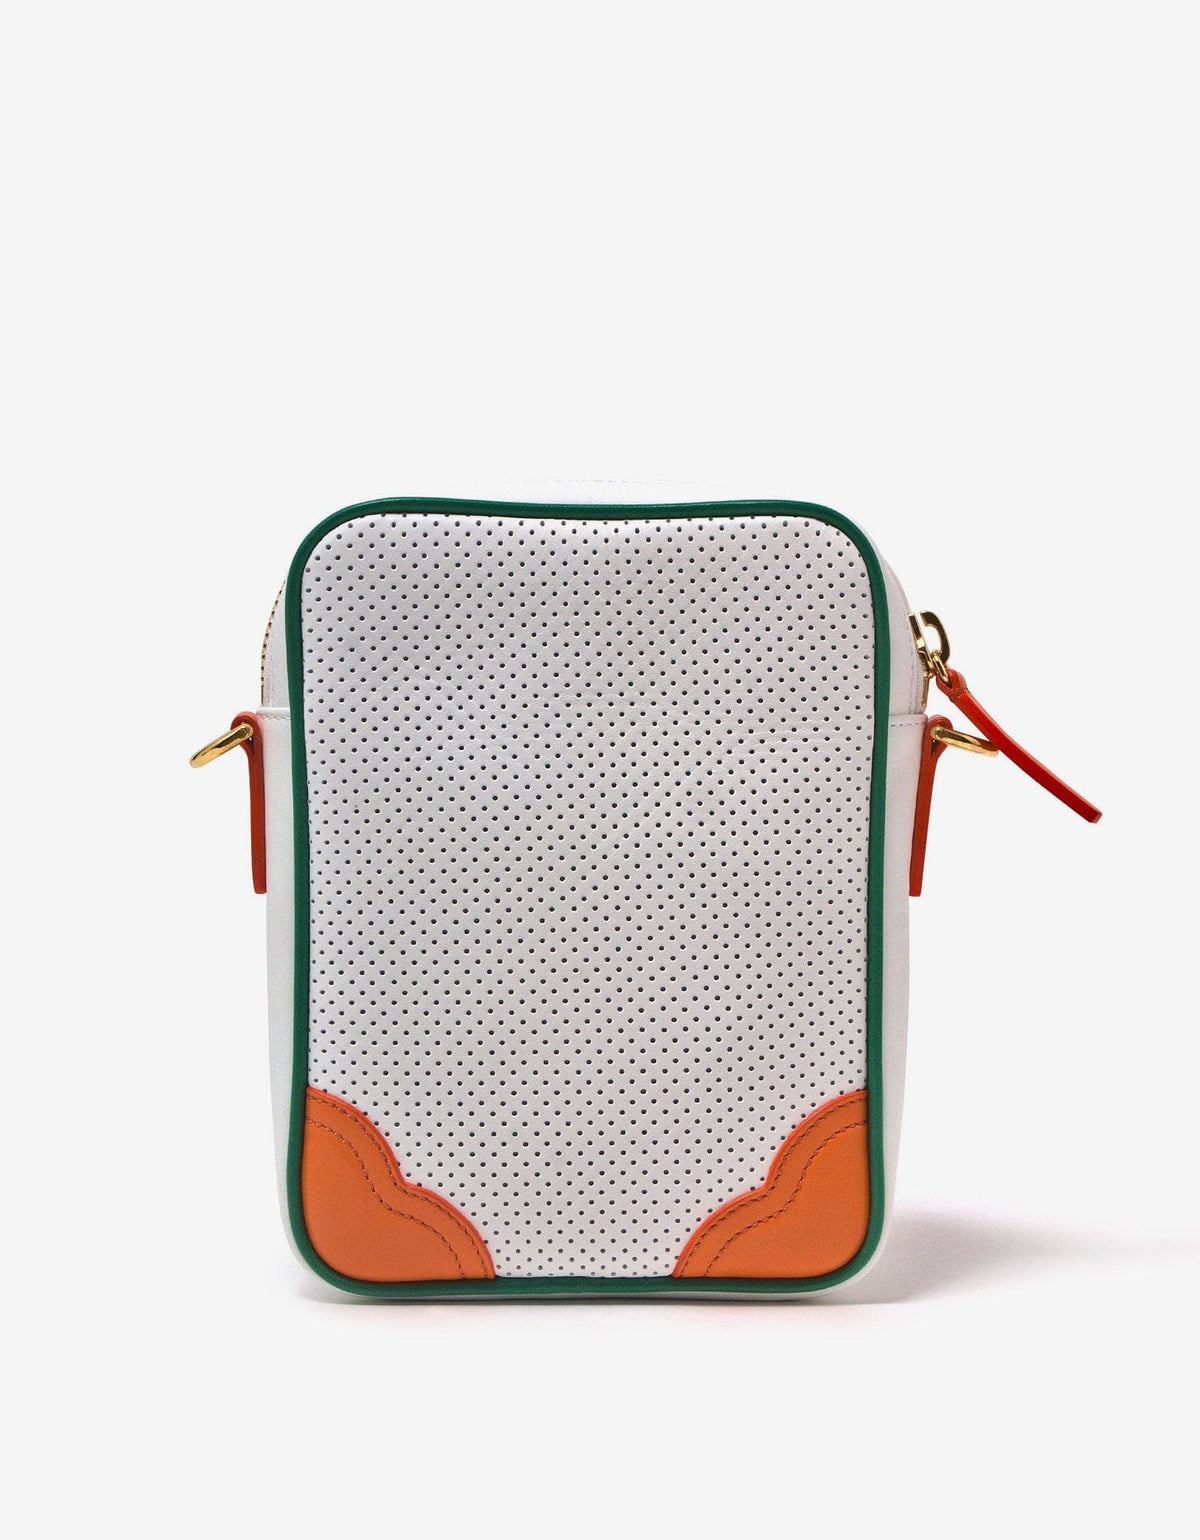 Casablanca White Perforated Leather Cross Body Bag